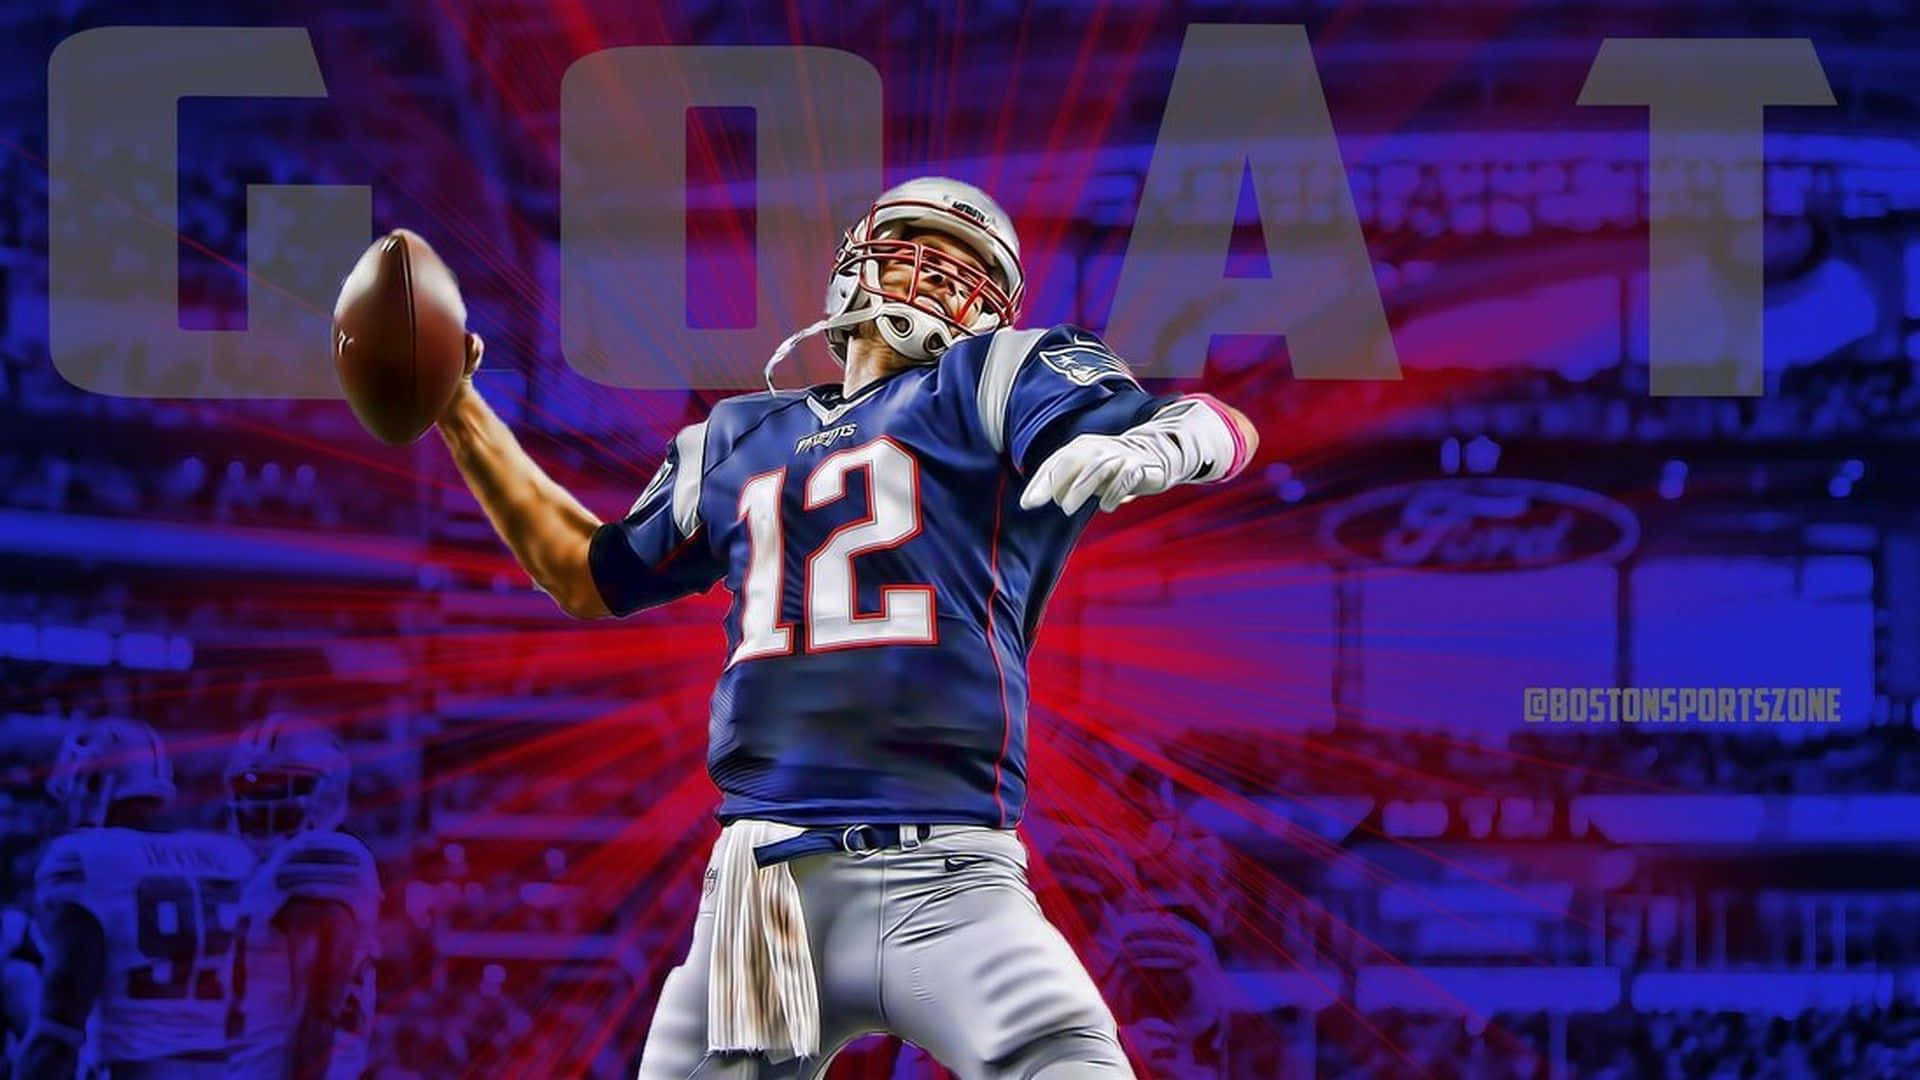 Show Your Patriot Spirit By Customizing Your Desktop Background Background